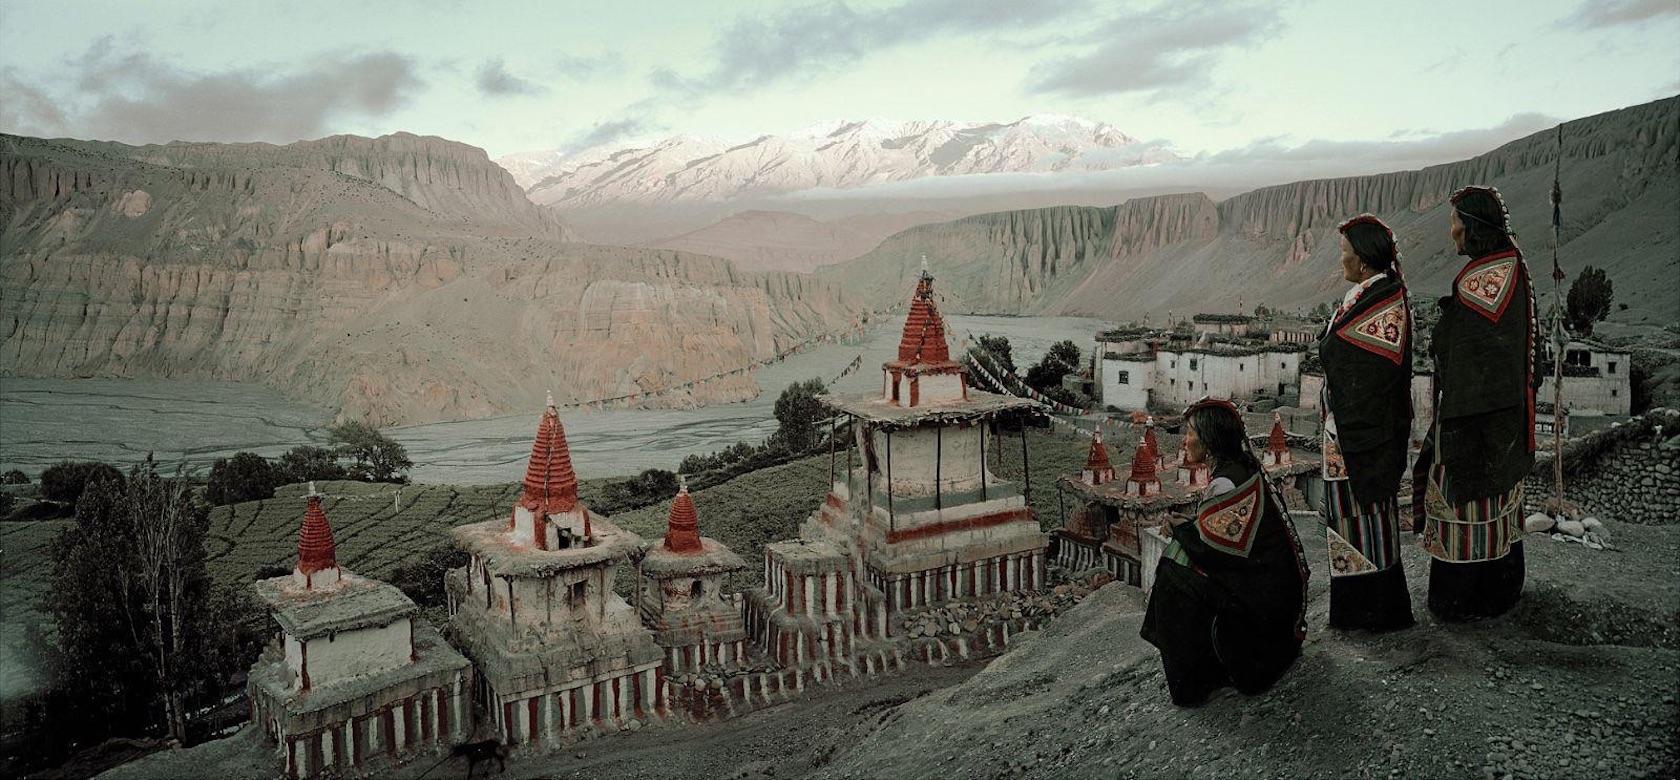 "XII 166 - Tsering Yangzom, Tachung & Tsering Wangmo - Tangge Village, Upper Mustang - Nepal, 2011

The former kingdom of Lo is linked by religion, culture and history to Tibet, but is politically part of Nepal. Now while Tibetan culture is in